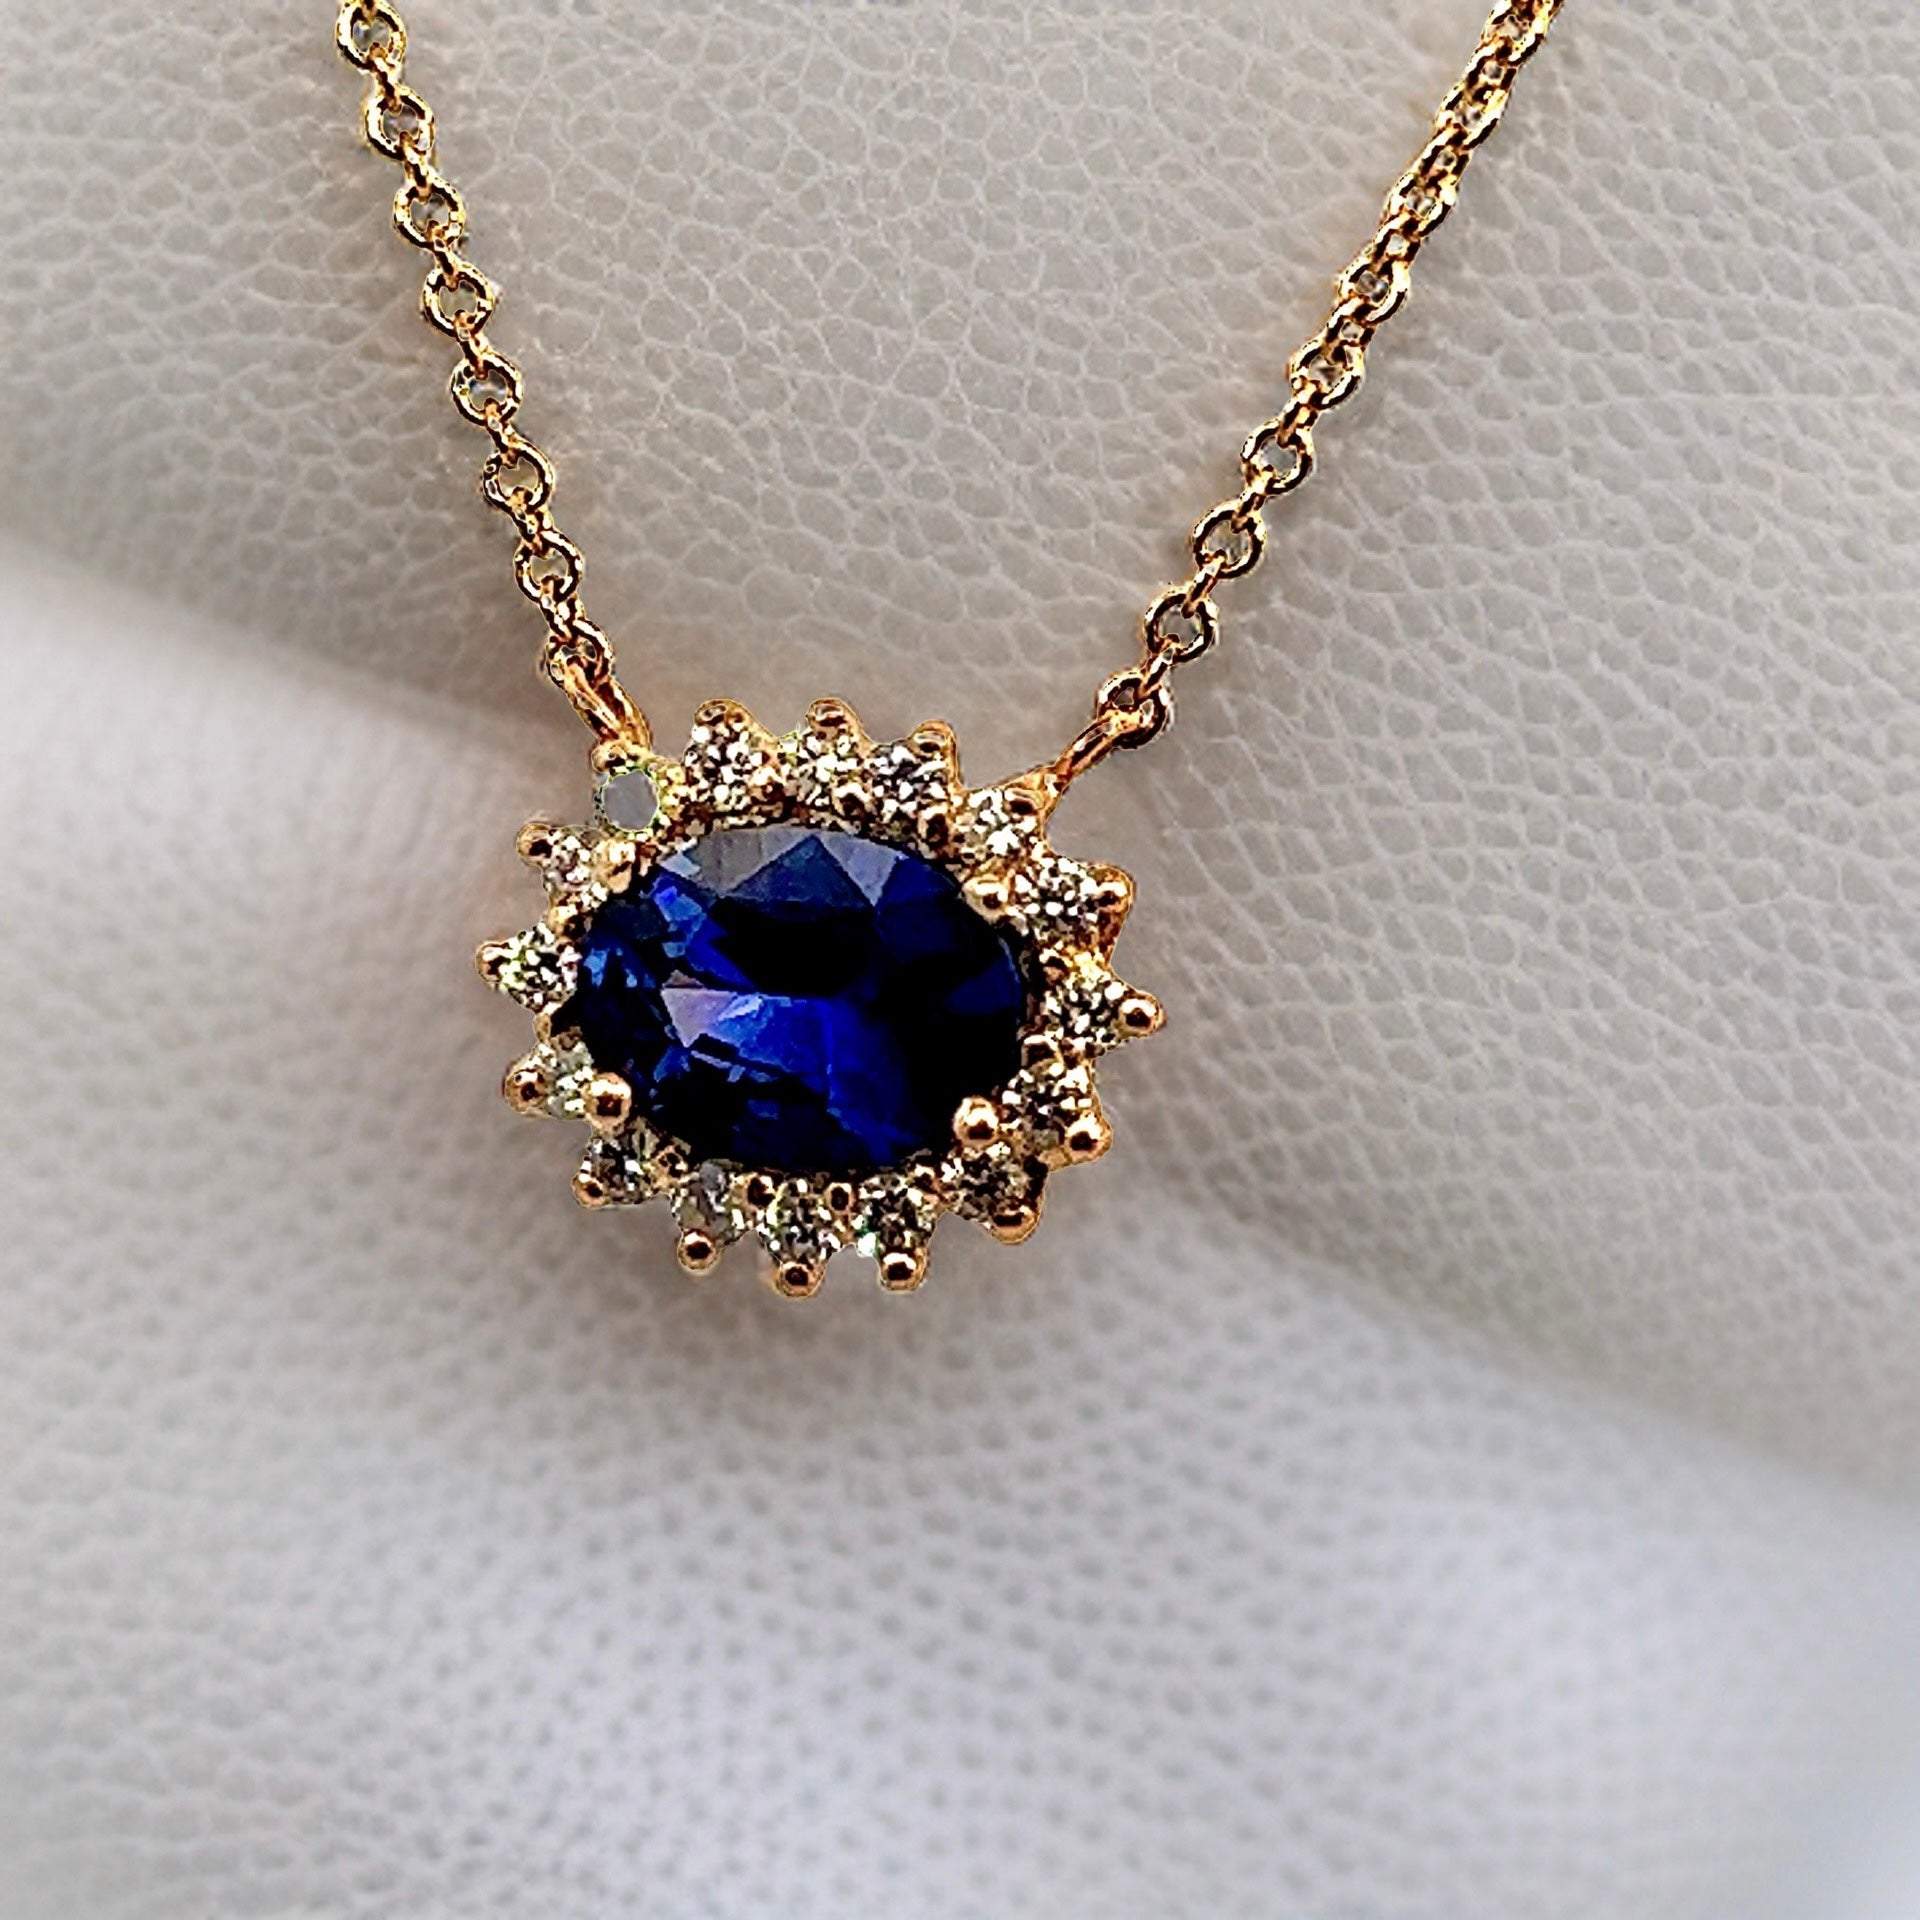 Natural Sapphire Diamond Halo Pendant With Chain 18" 14k YG 1.67 TCW Certified $4,950 300633 - Certified Fine Jewelry